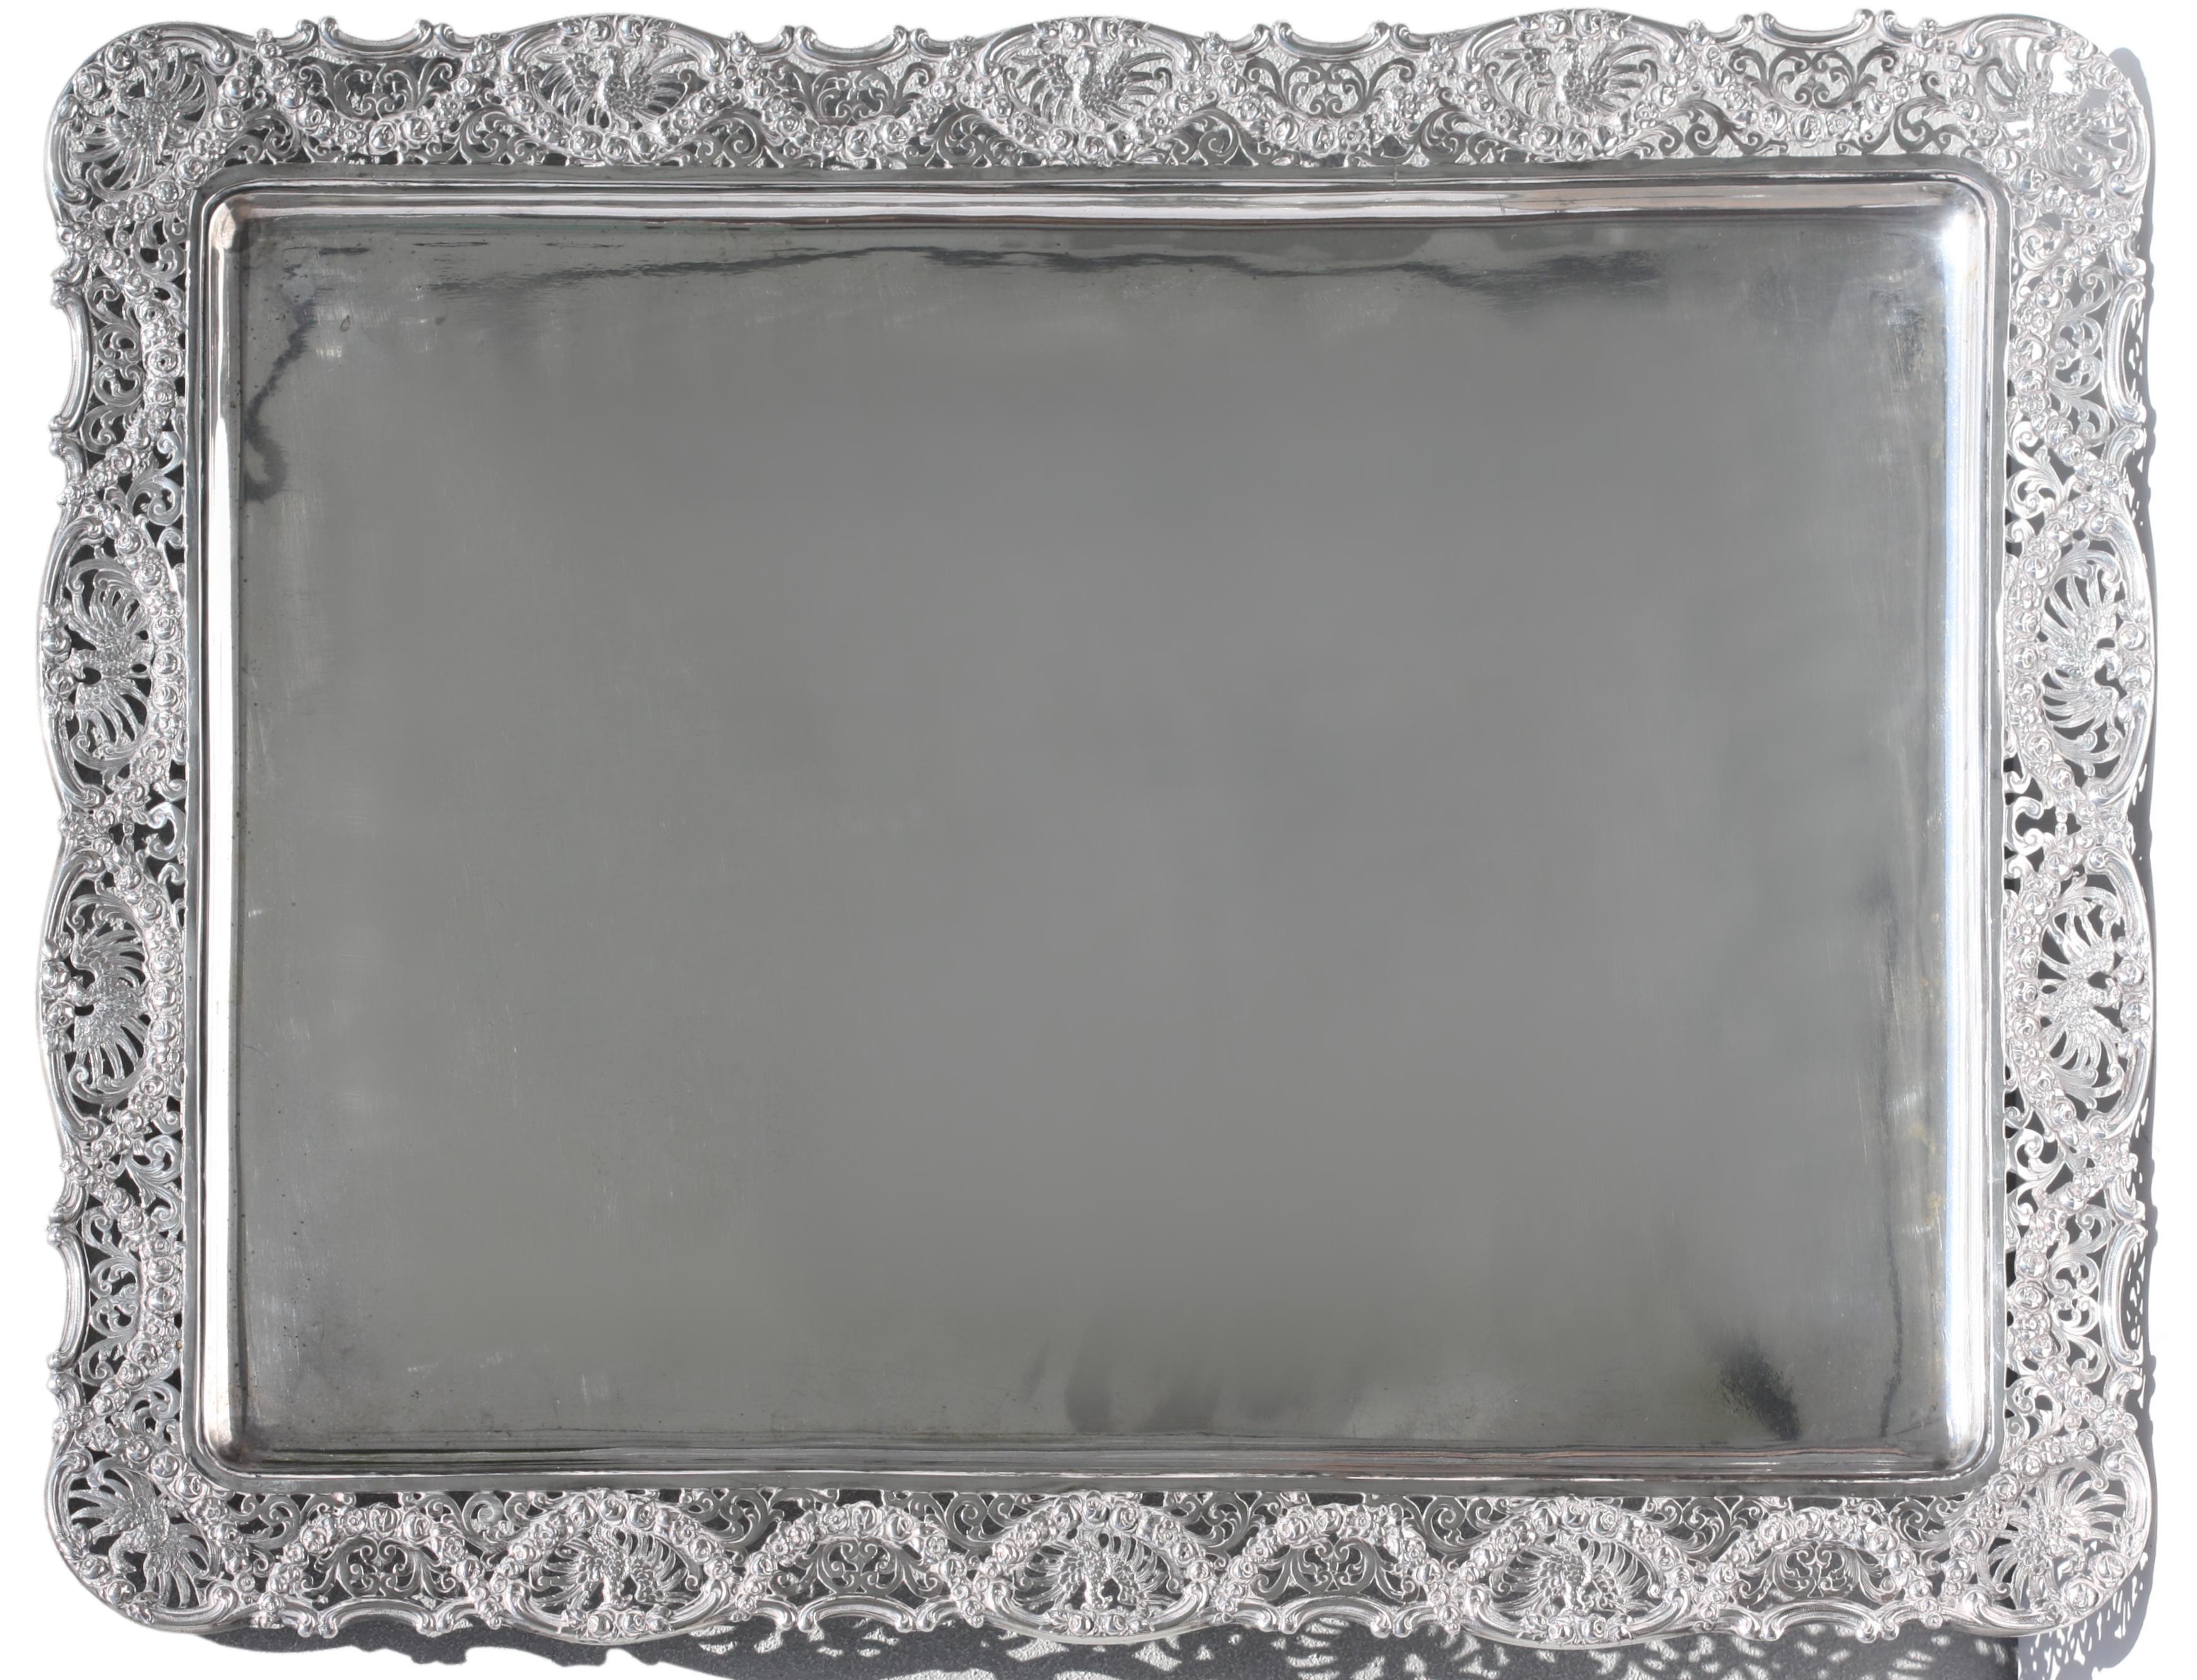  Continental Silver Rectangular Tray, Probably German For Sale 4